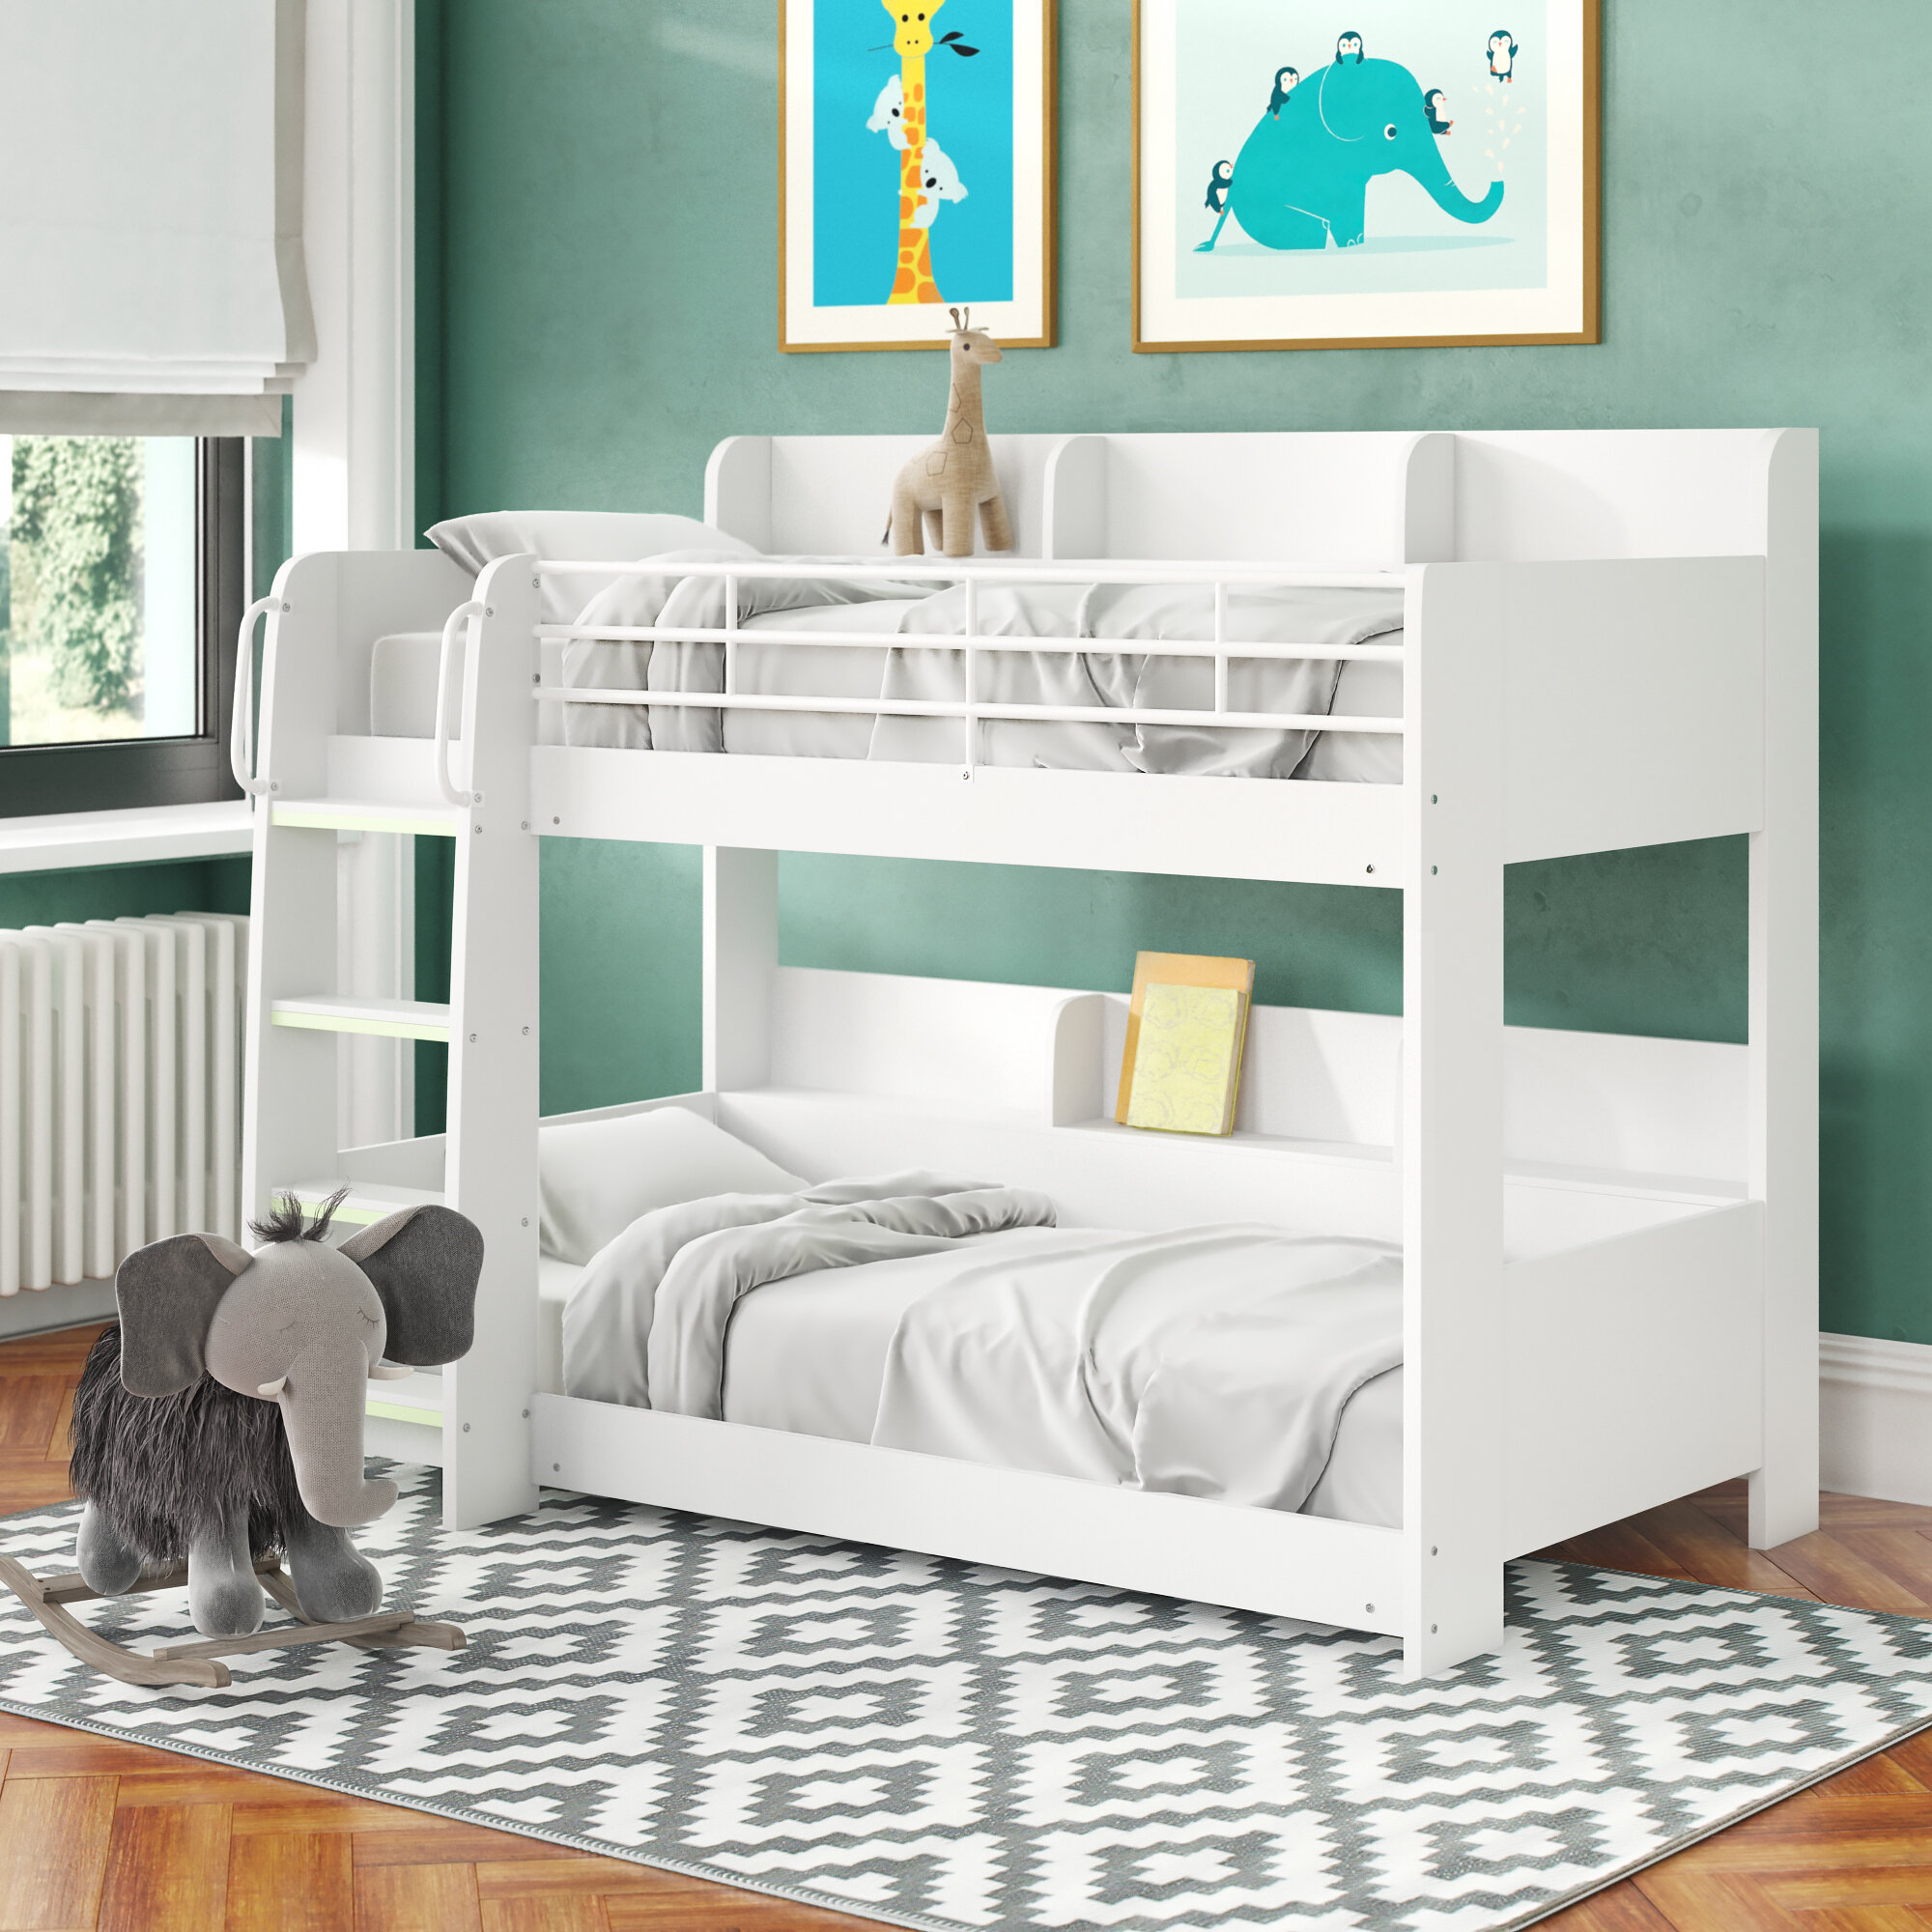 Just Kids Abby Single Bunk Bed With Bookcase Reviews Wayfair Co Uk